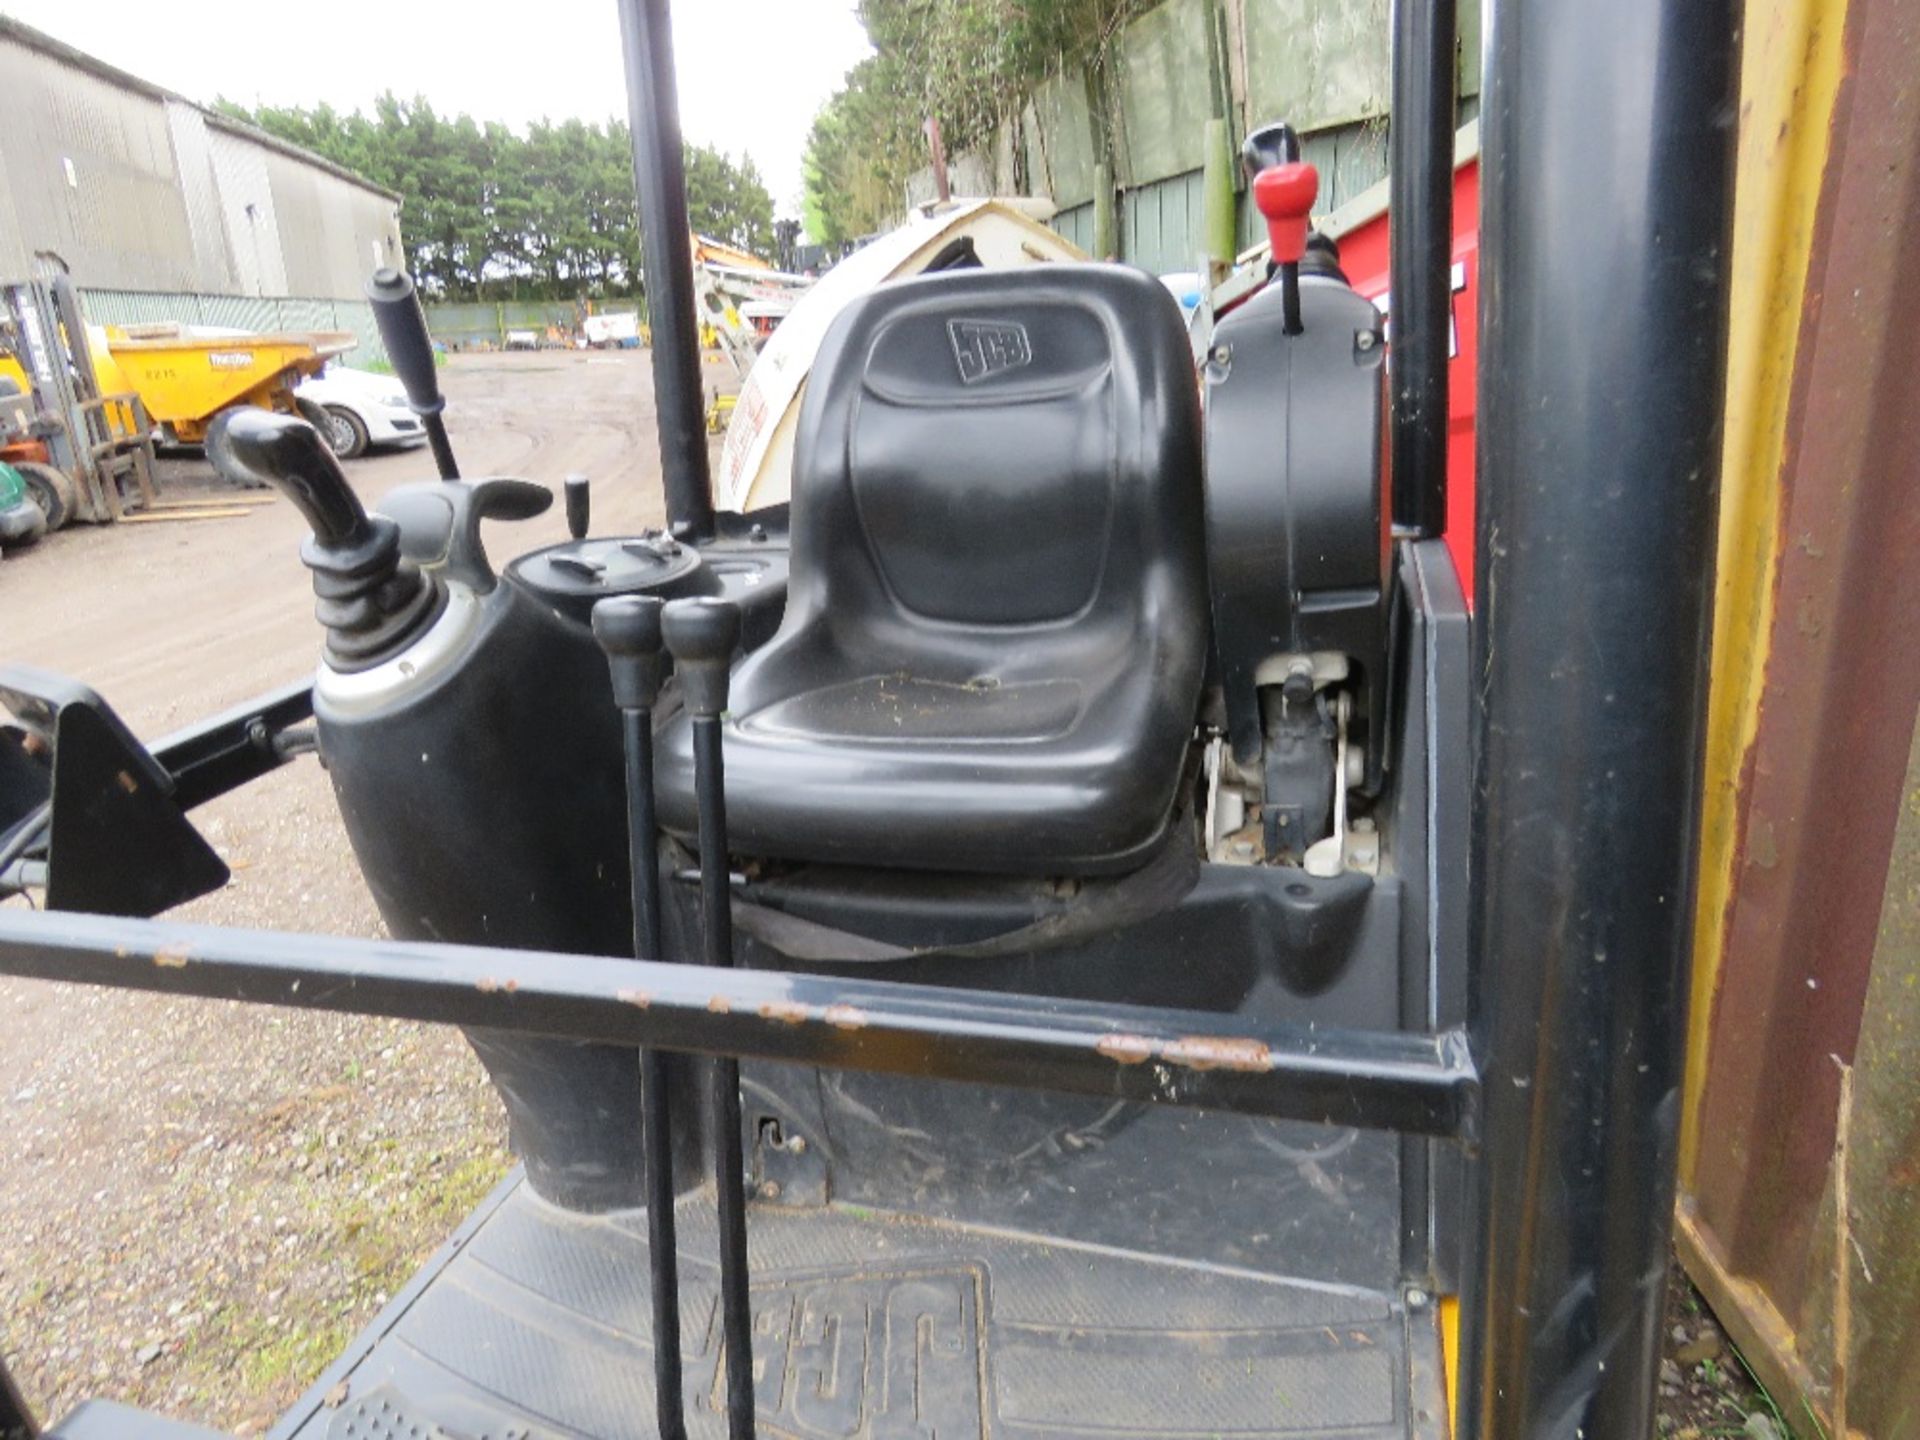 JCB 8018CTS RUBBER TRACKED MINI EXCAVATOR YEAR 2017, 1017 REC HOURS. WITH ONE BUCKET AND A POST HOLE - Image 10 of 14